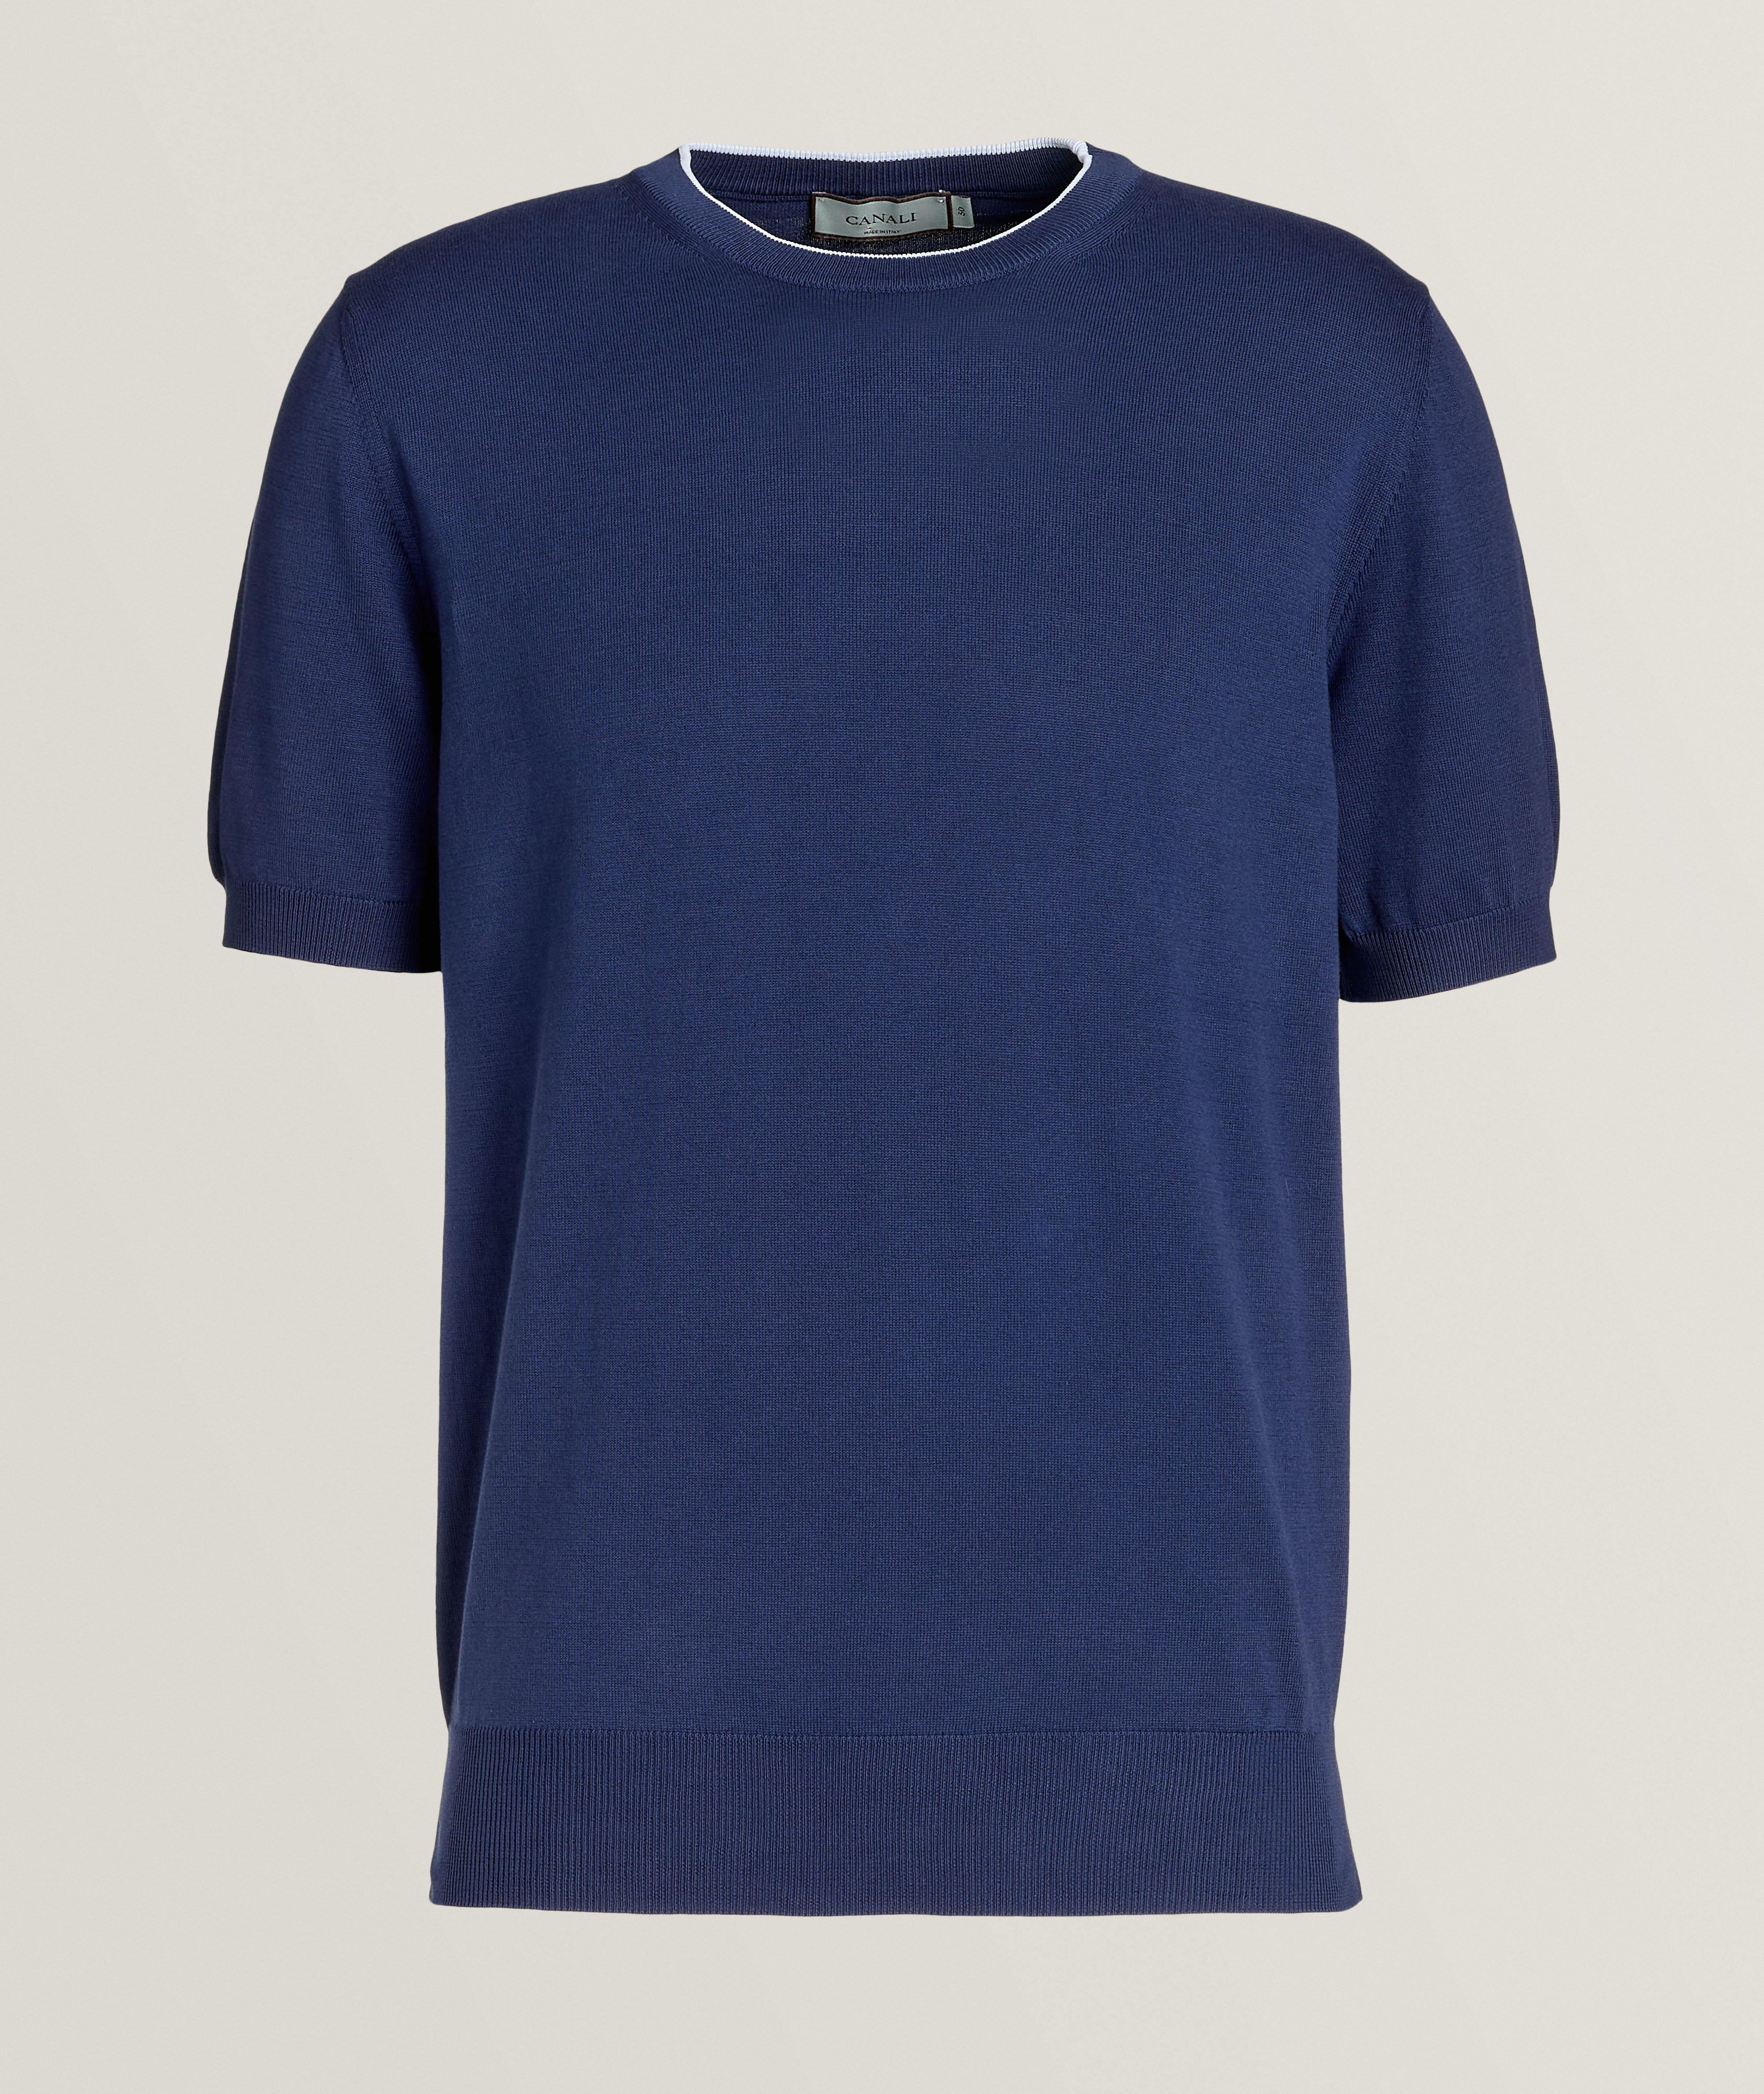 Contrast Tipped Cotton T-Shirt